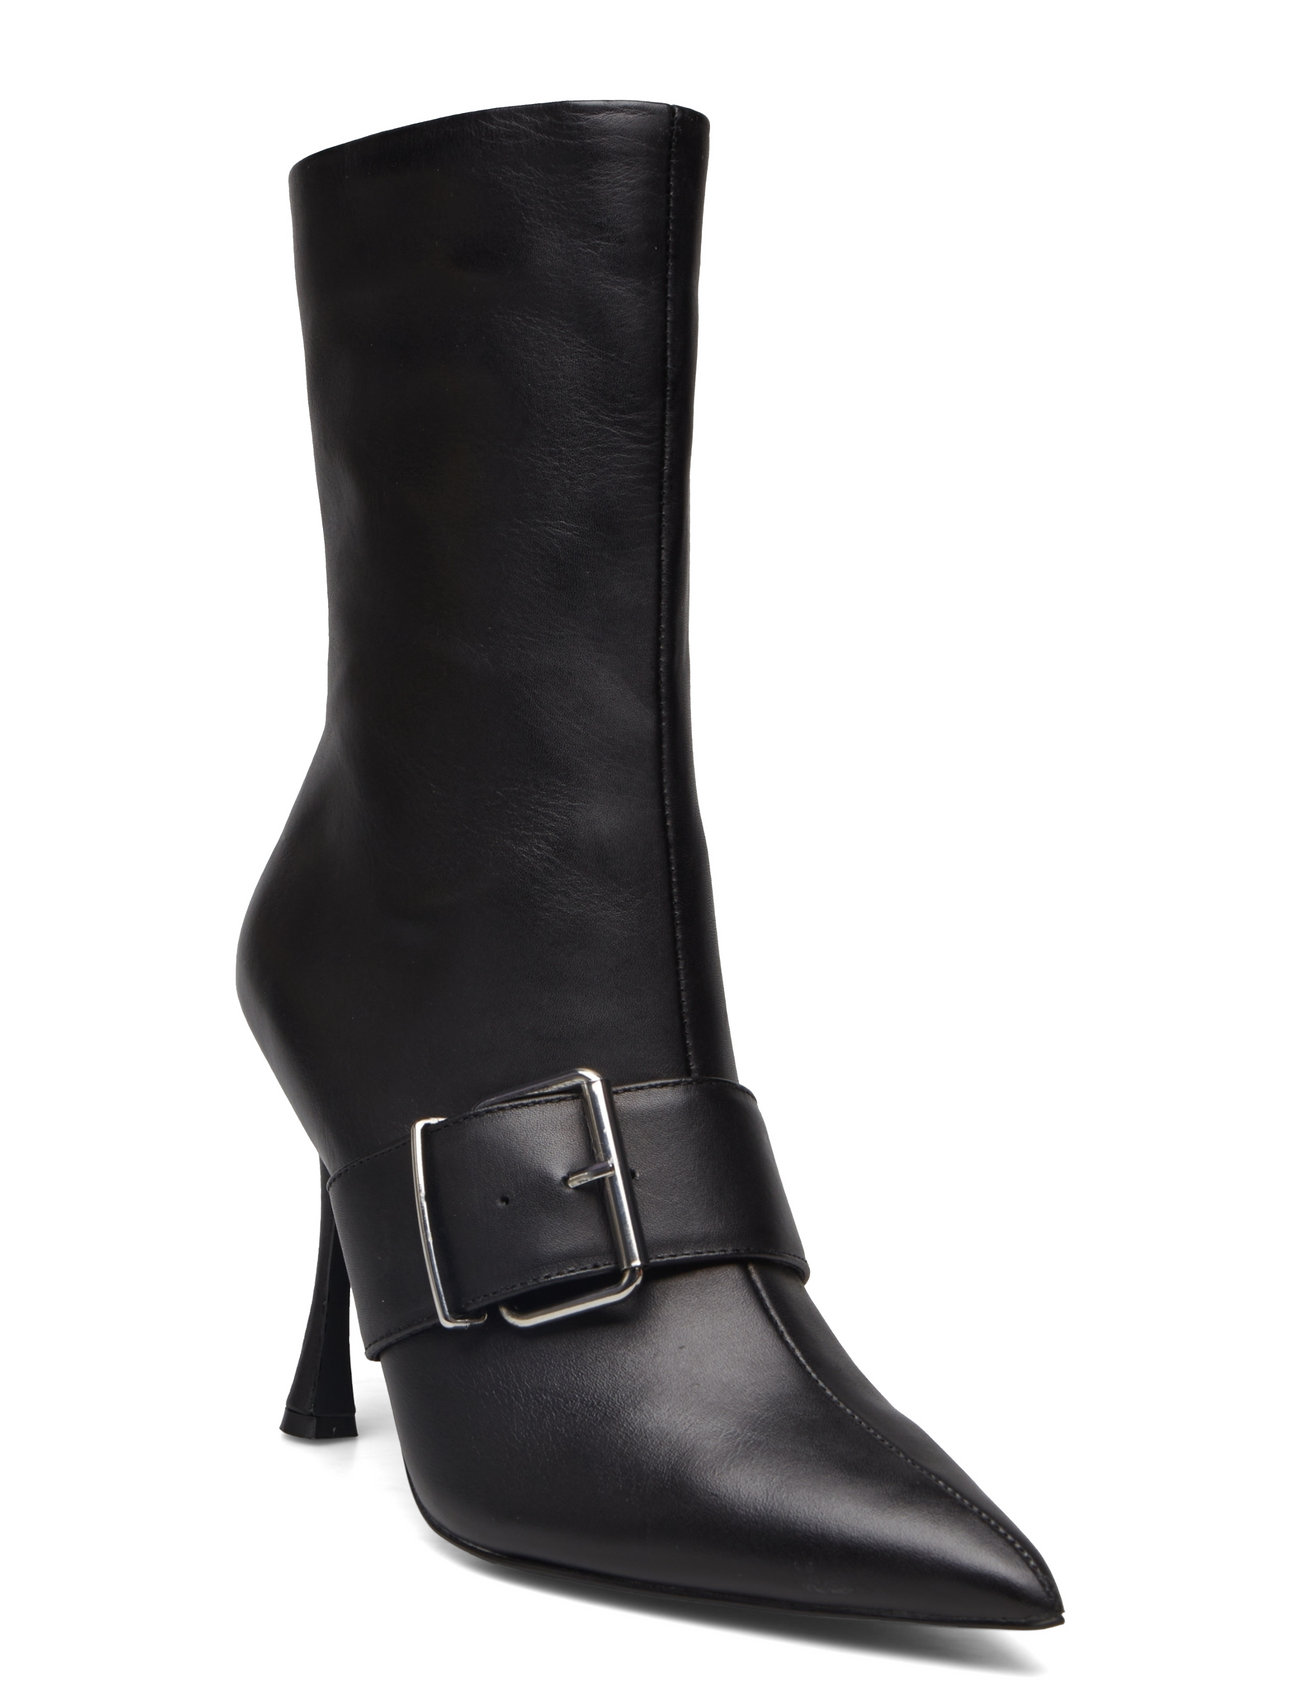 Banter Bootie Shoes Boots Ankle Boots Ankle Boots With Heel Black Steve Madden